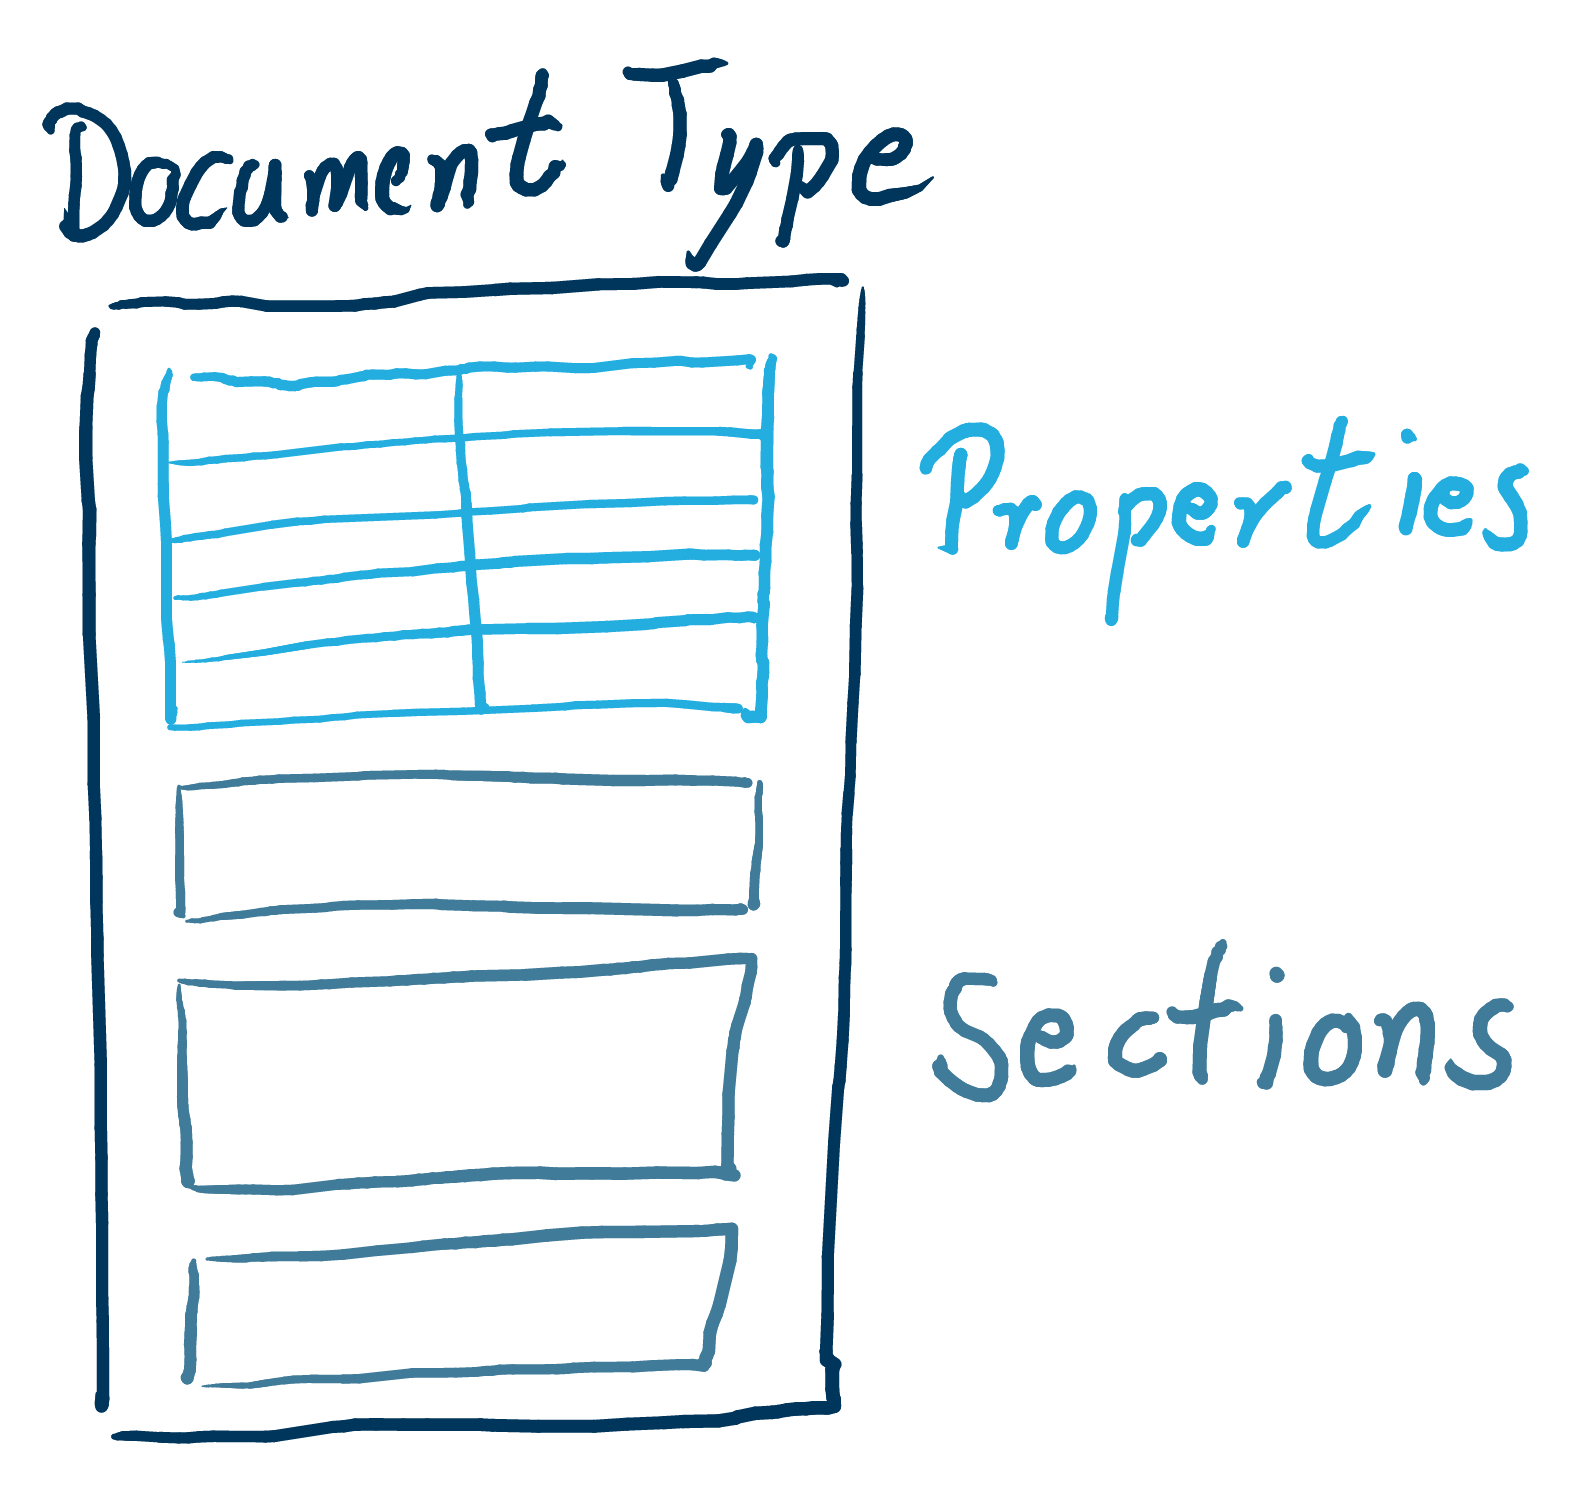 A Document Type defines Properties and Sections